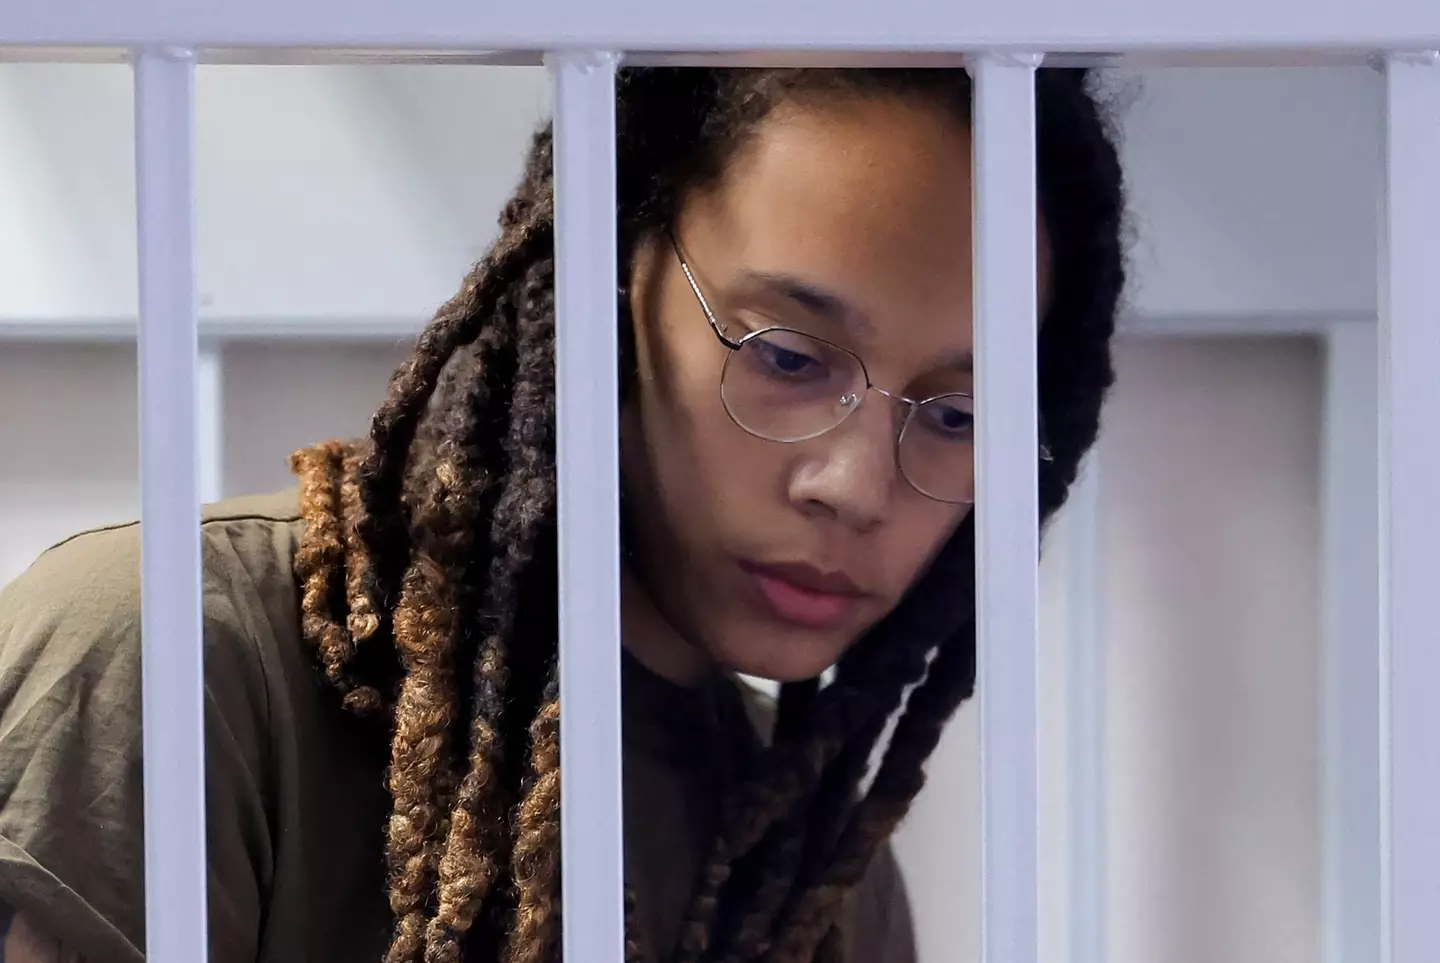 Griner spent nearly ten months behind bars in Russia. (EVGENIA NOVOZHENINA/POOL/AFP via Getty Images)